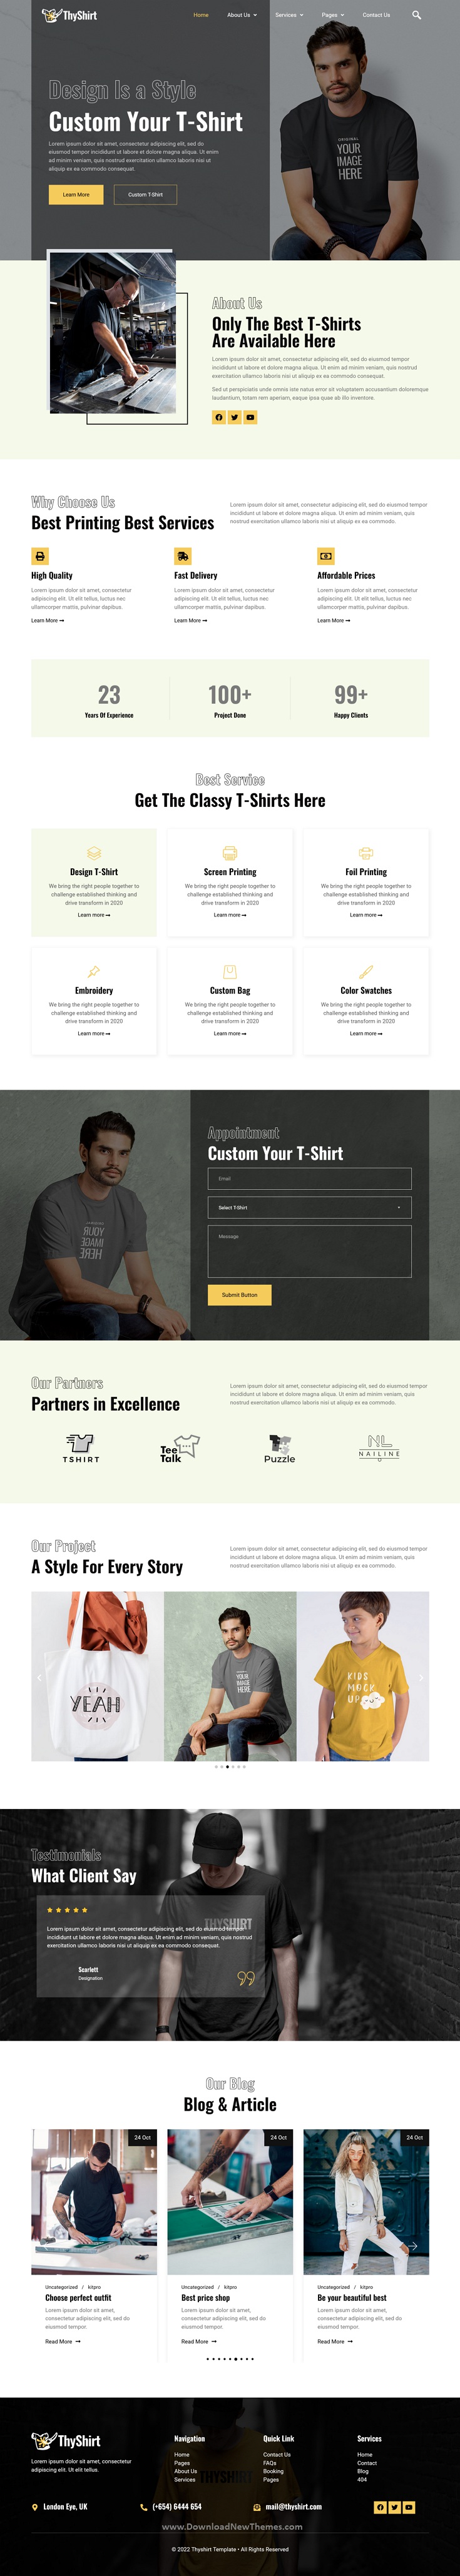 Thyshirt - TShirt Design and Printing Elementor Template Kit Review